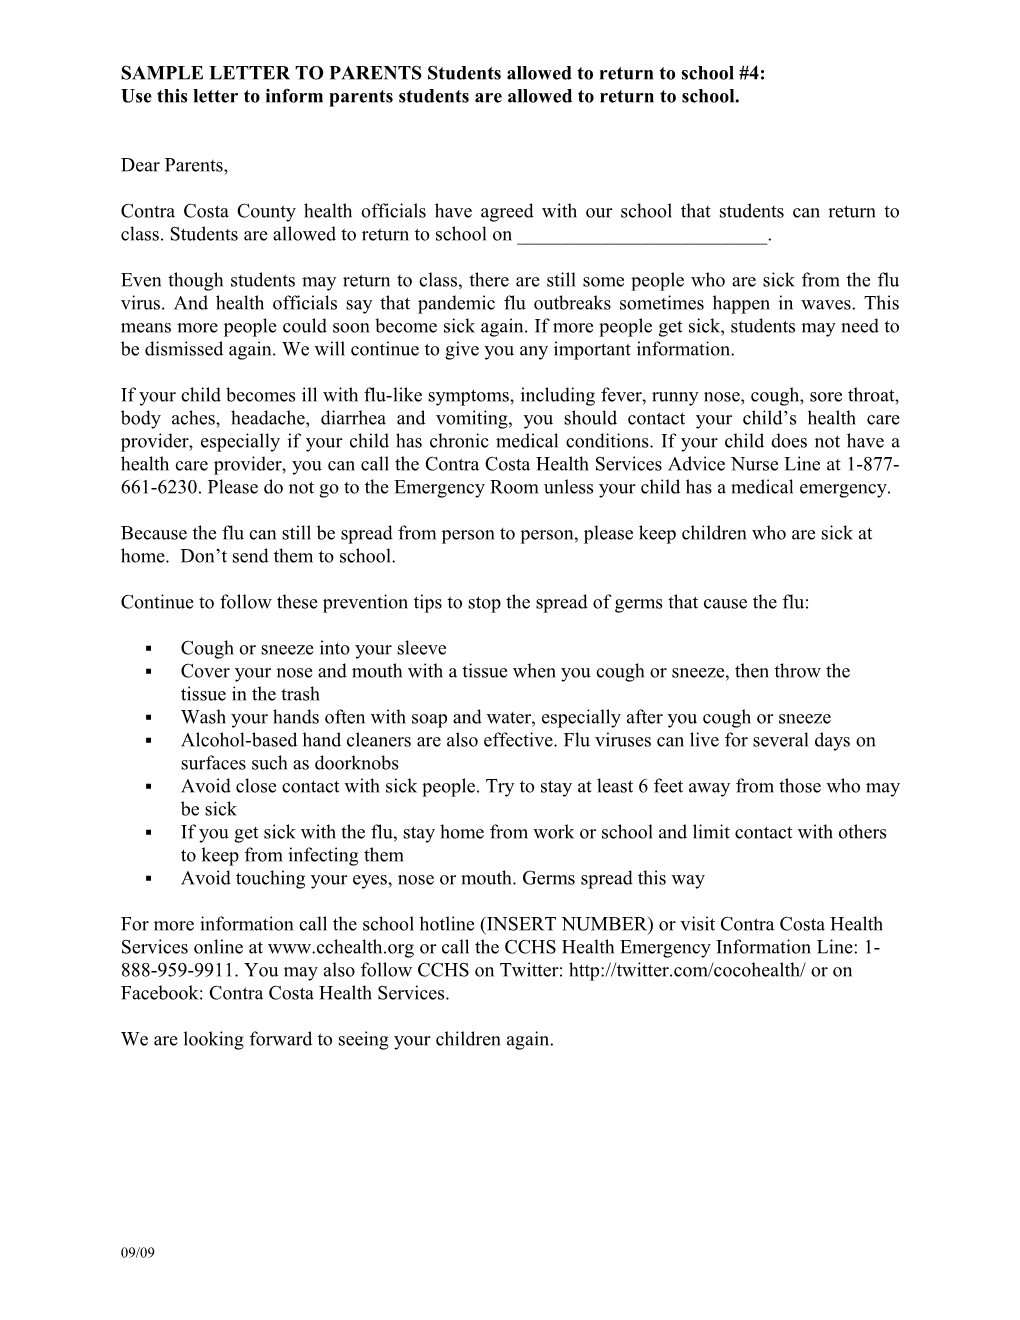 SAMPLE LETTER to PARENTS Students Allowed to Return to School #4